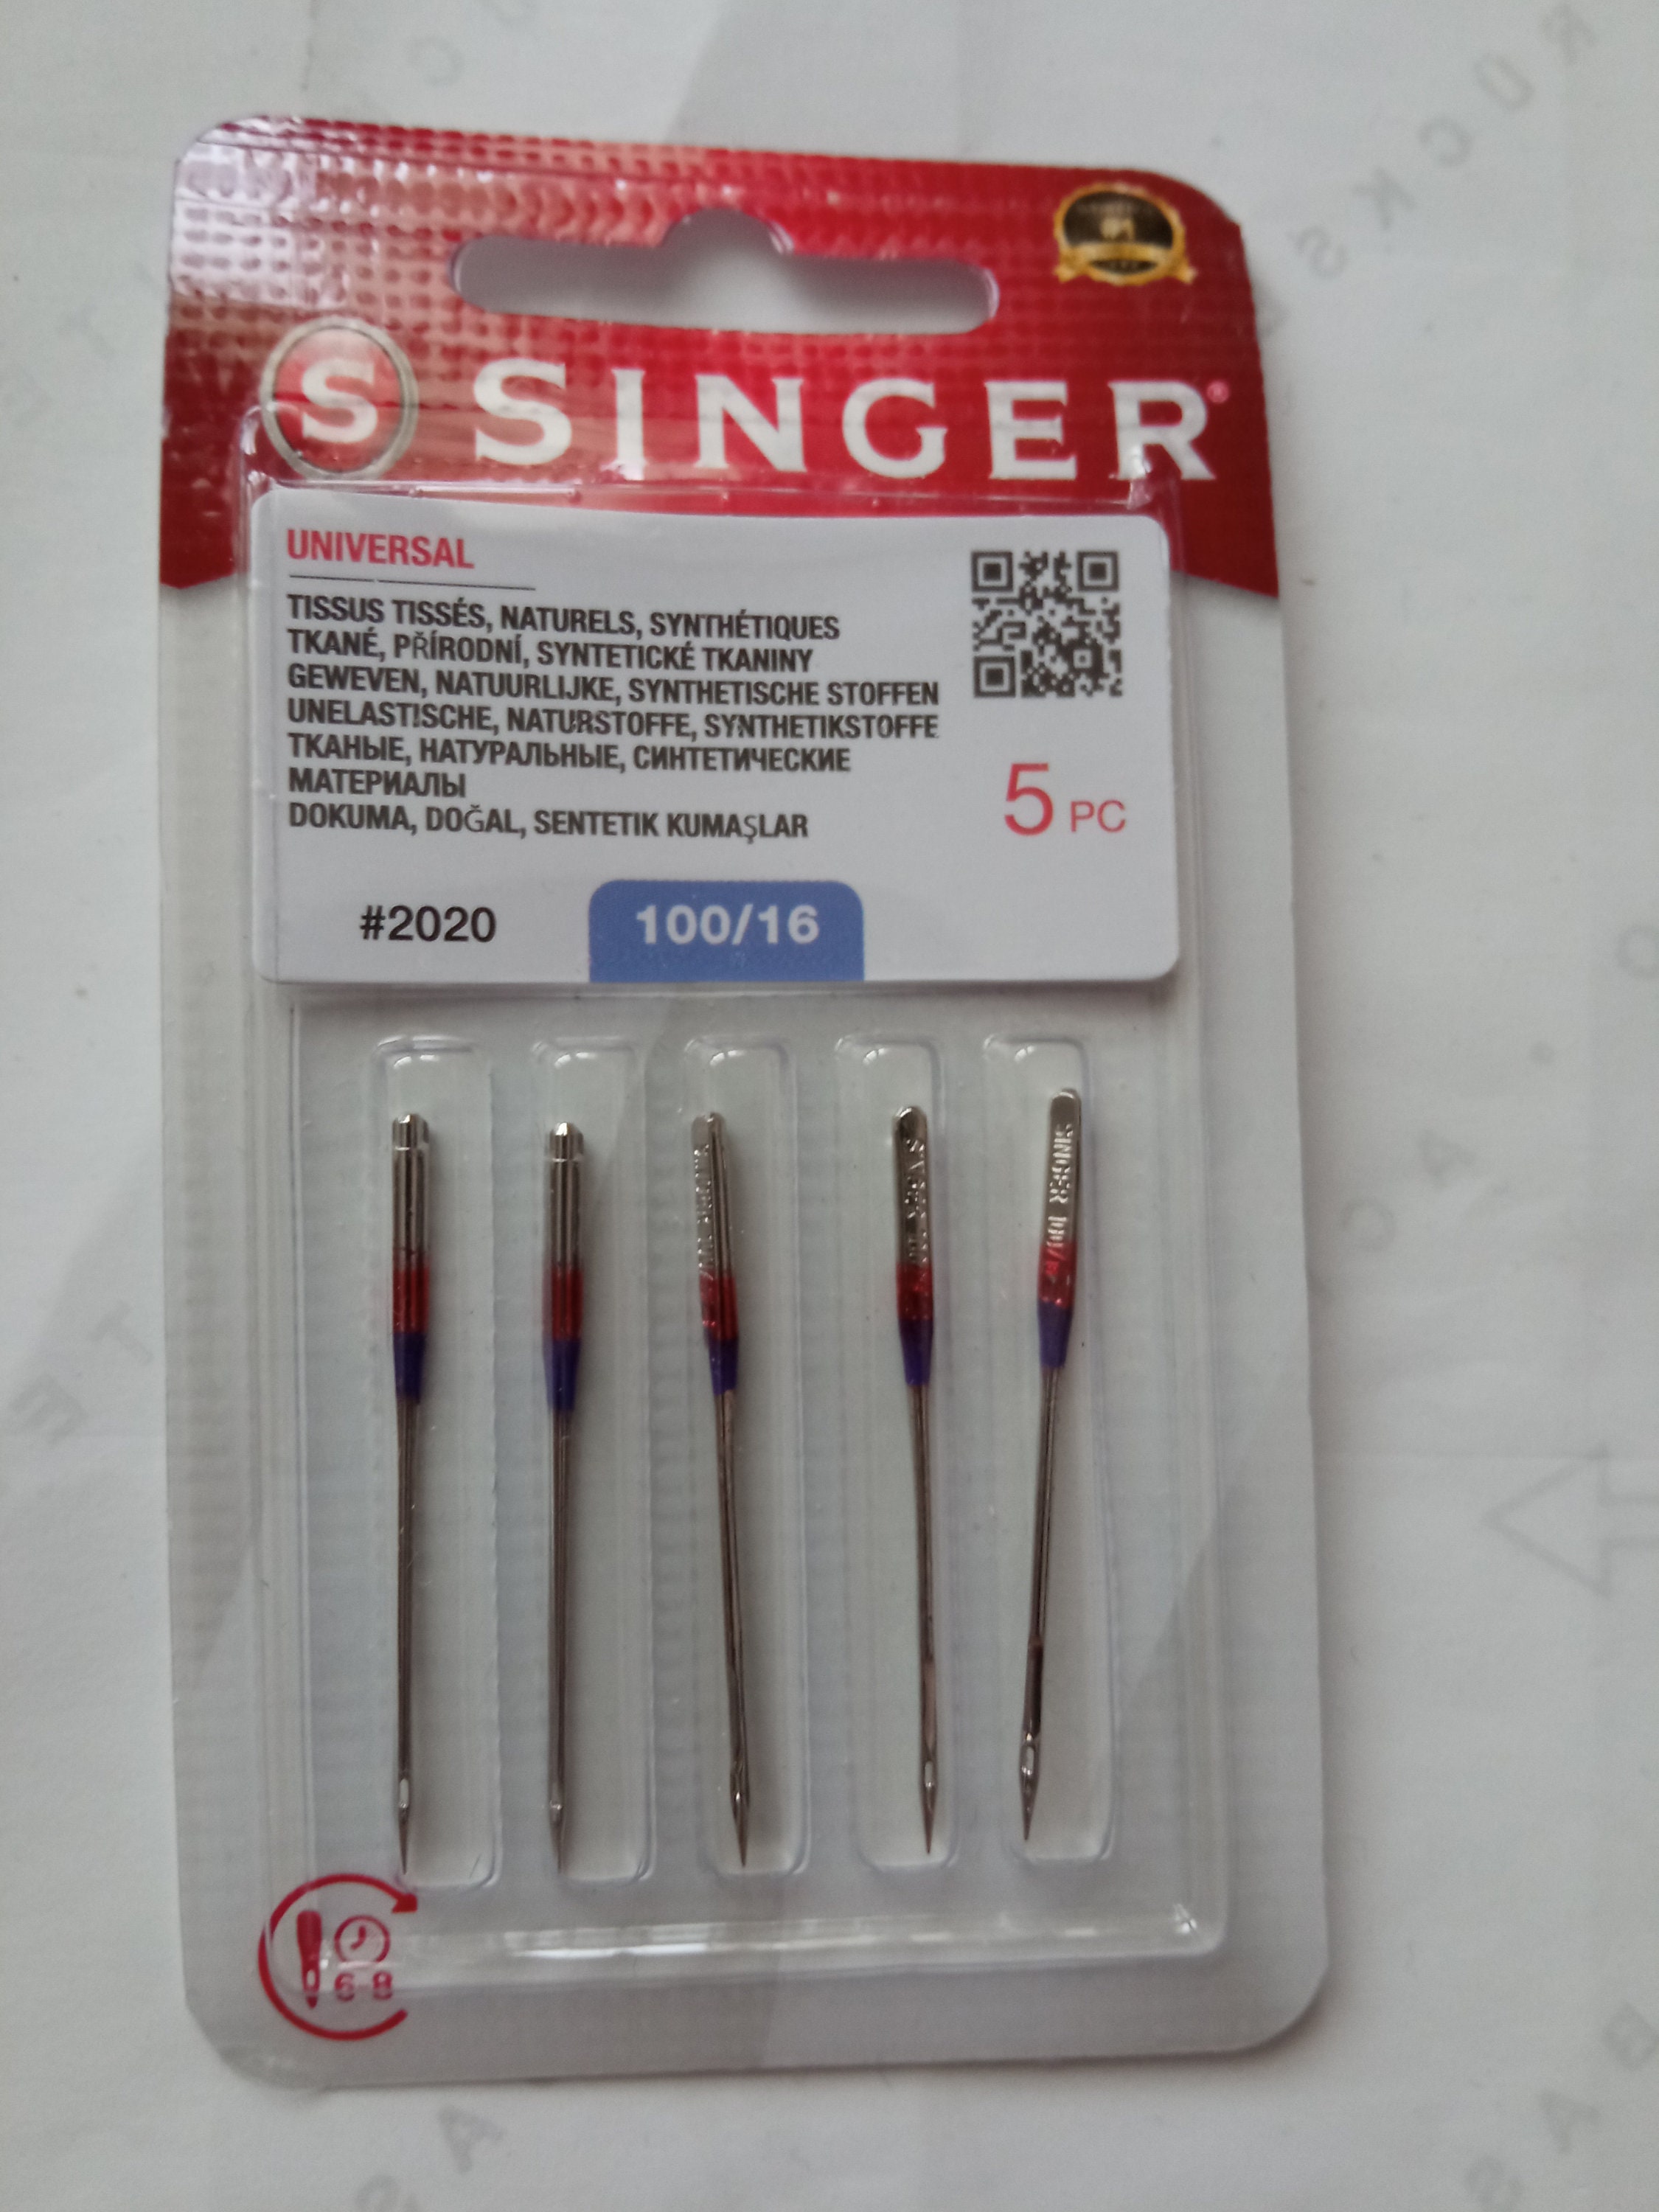 SINGER Needles #2020 for All Home Sewing Machines.